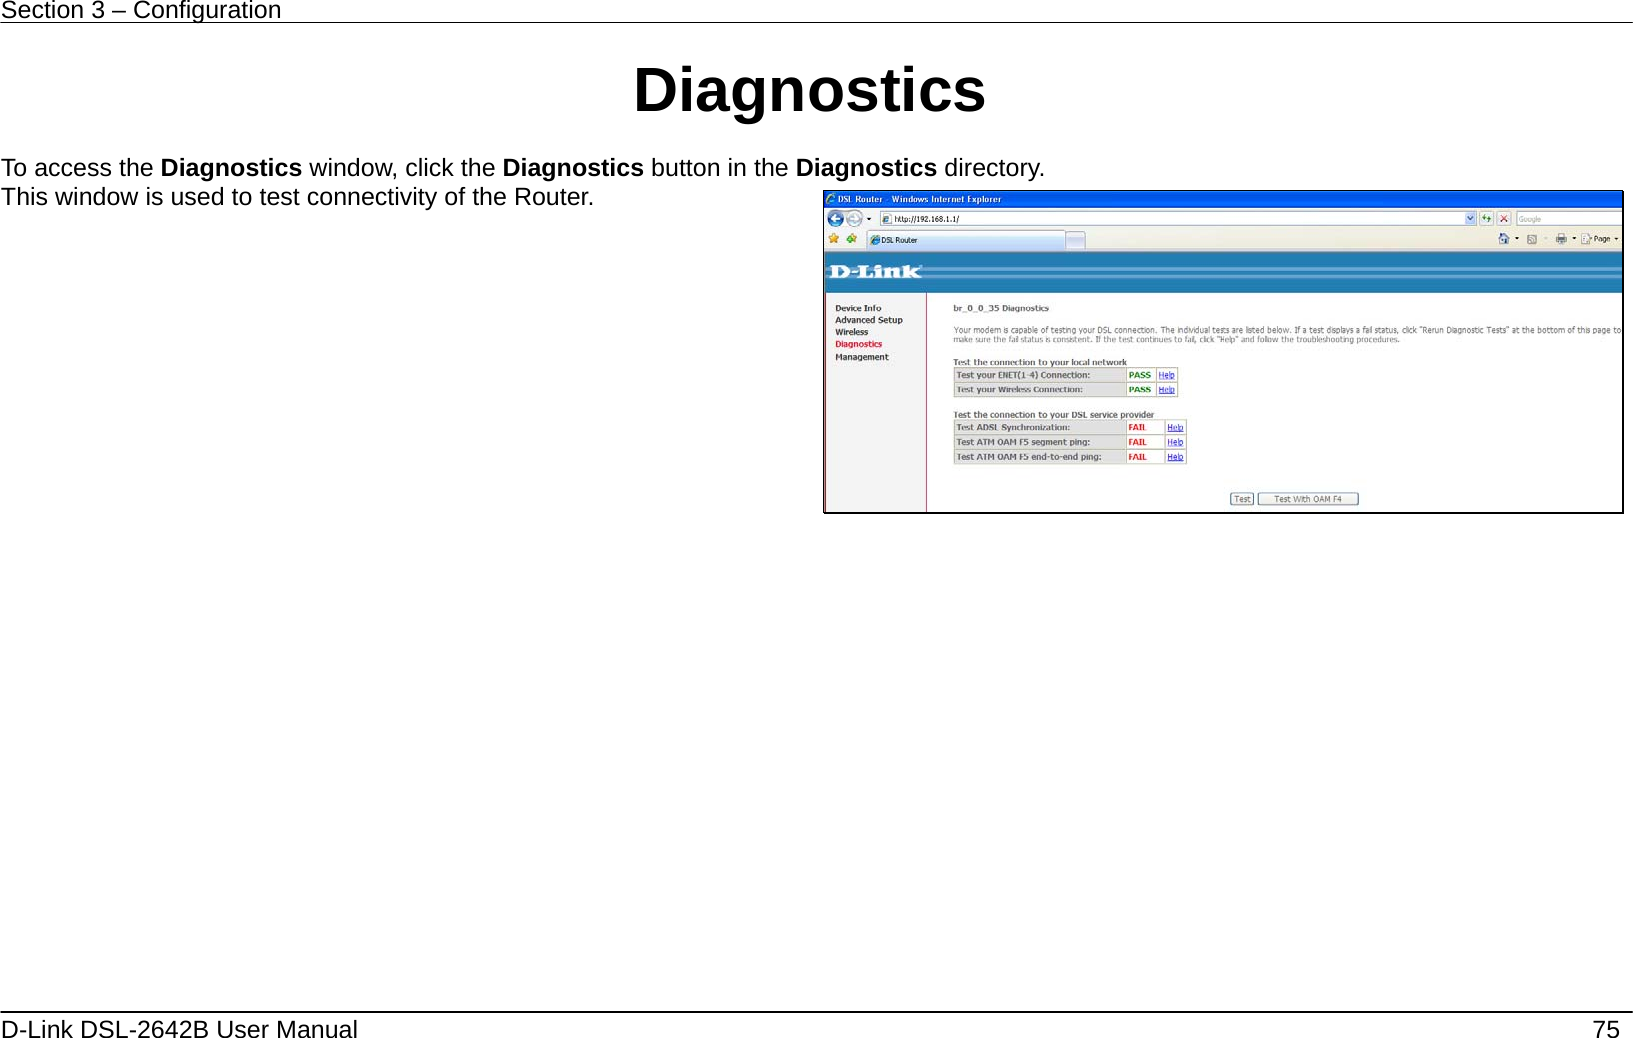 Section 3 – Configuration   D-Link DSL-2642B User Manual    75 Diagnostics  To access the Diagnostics window, click the Diagnostics button in the Diagnostics directory. This window is used to test connectivity of the Router.                 